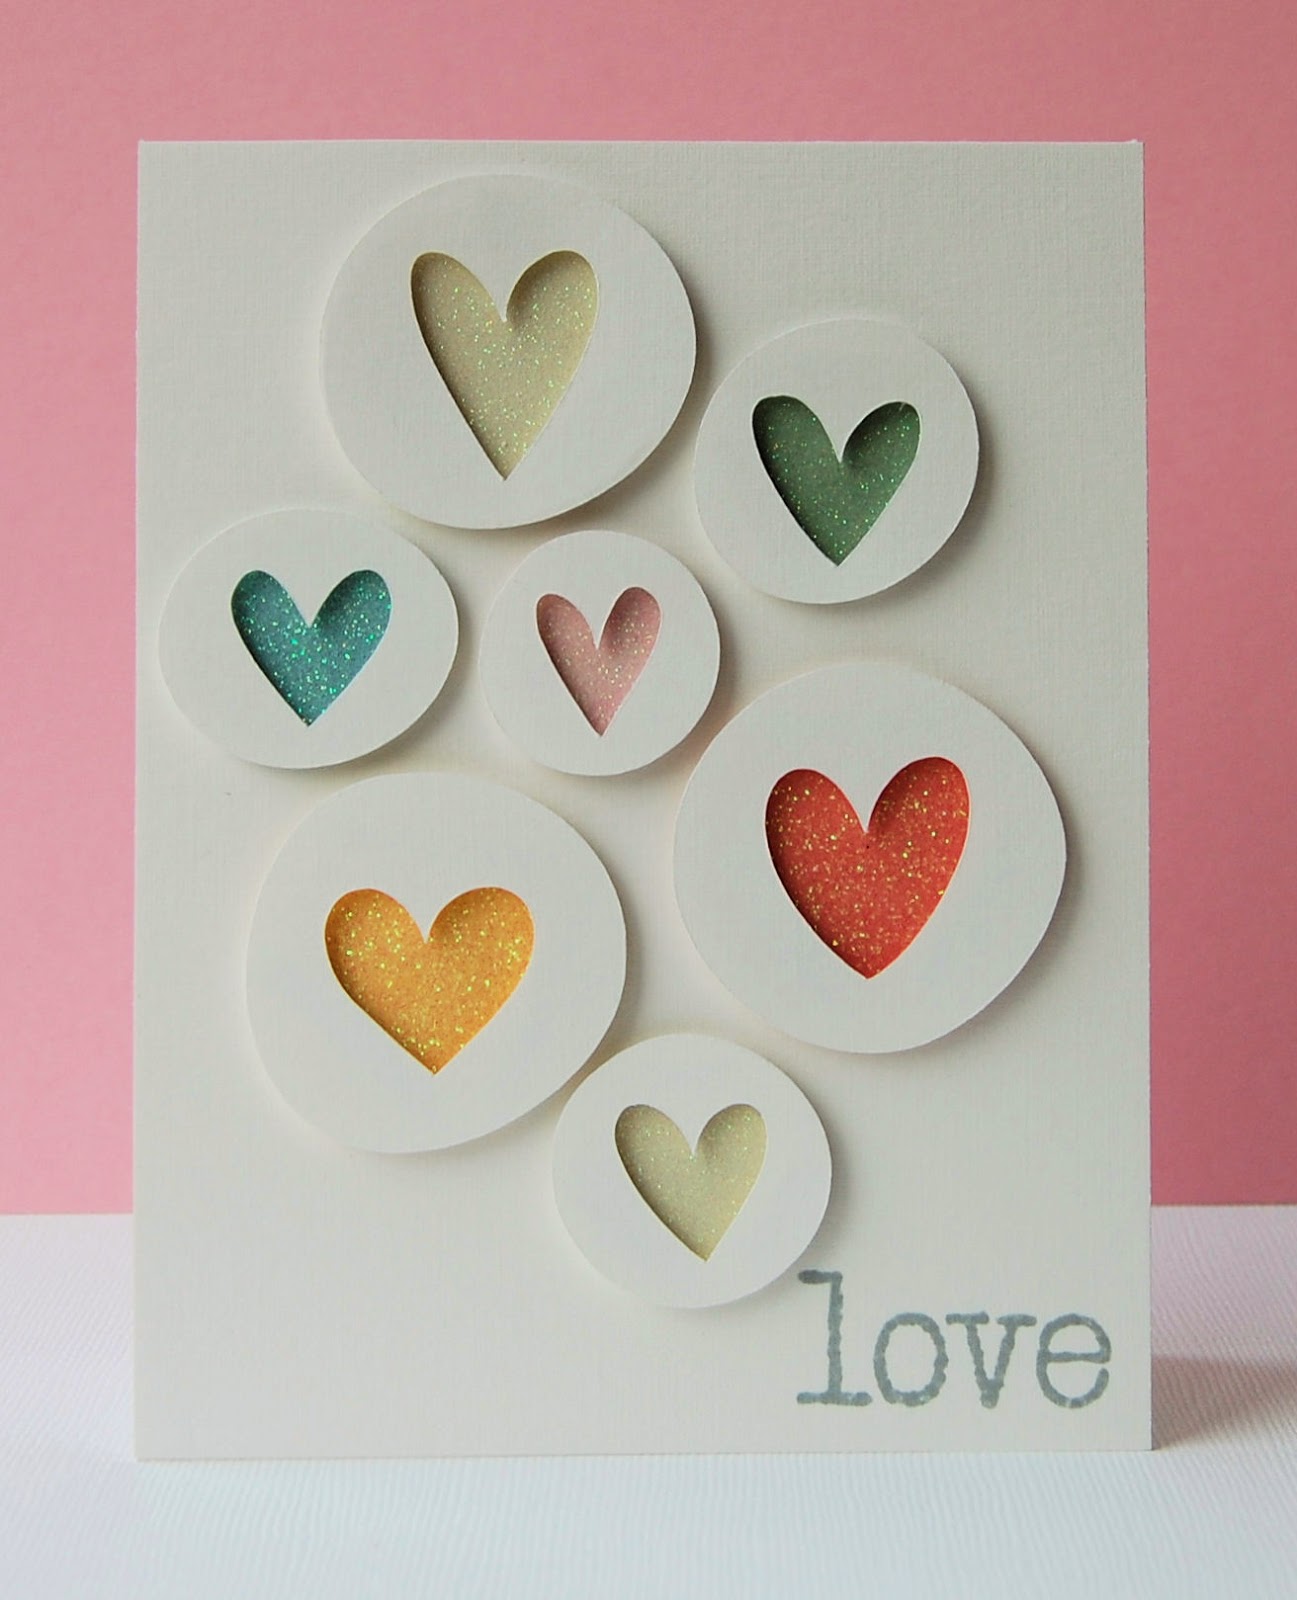 Love Hearts handmade card by Ang Mansfield of Paper and Ribbons